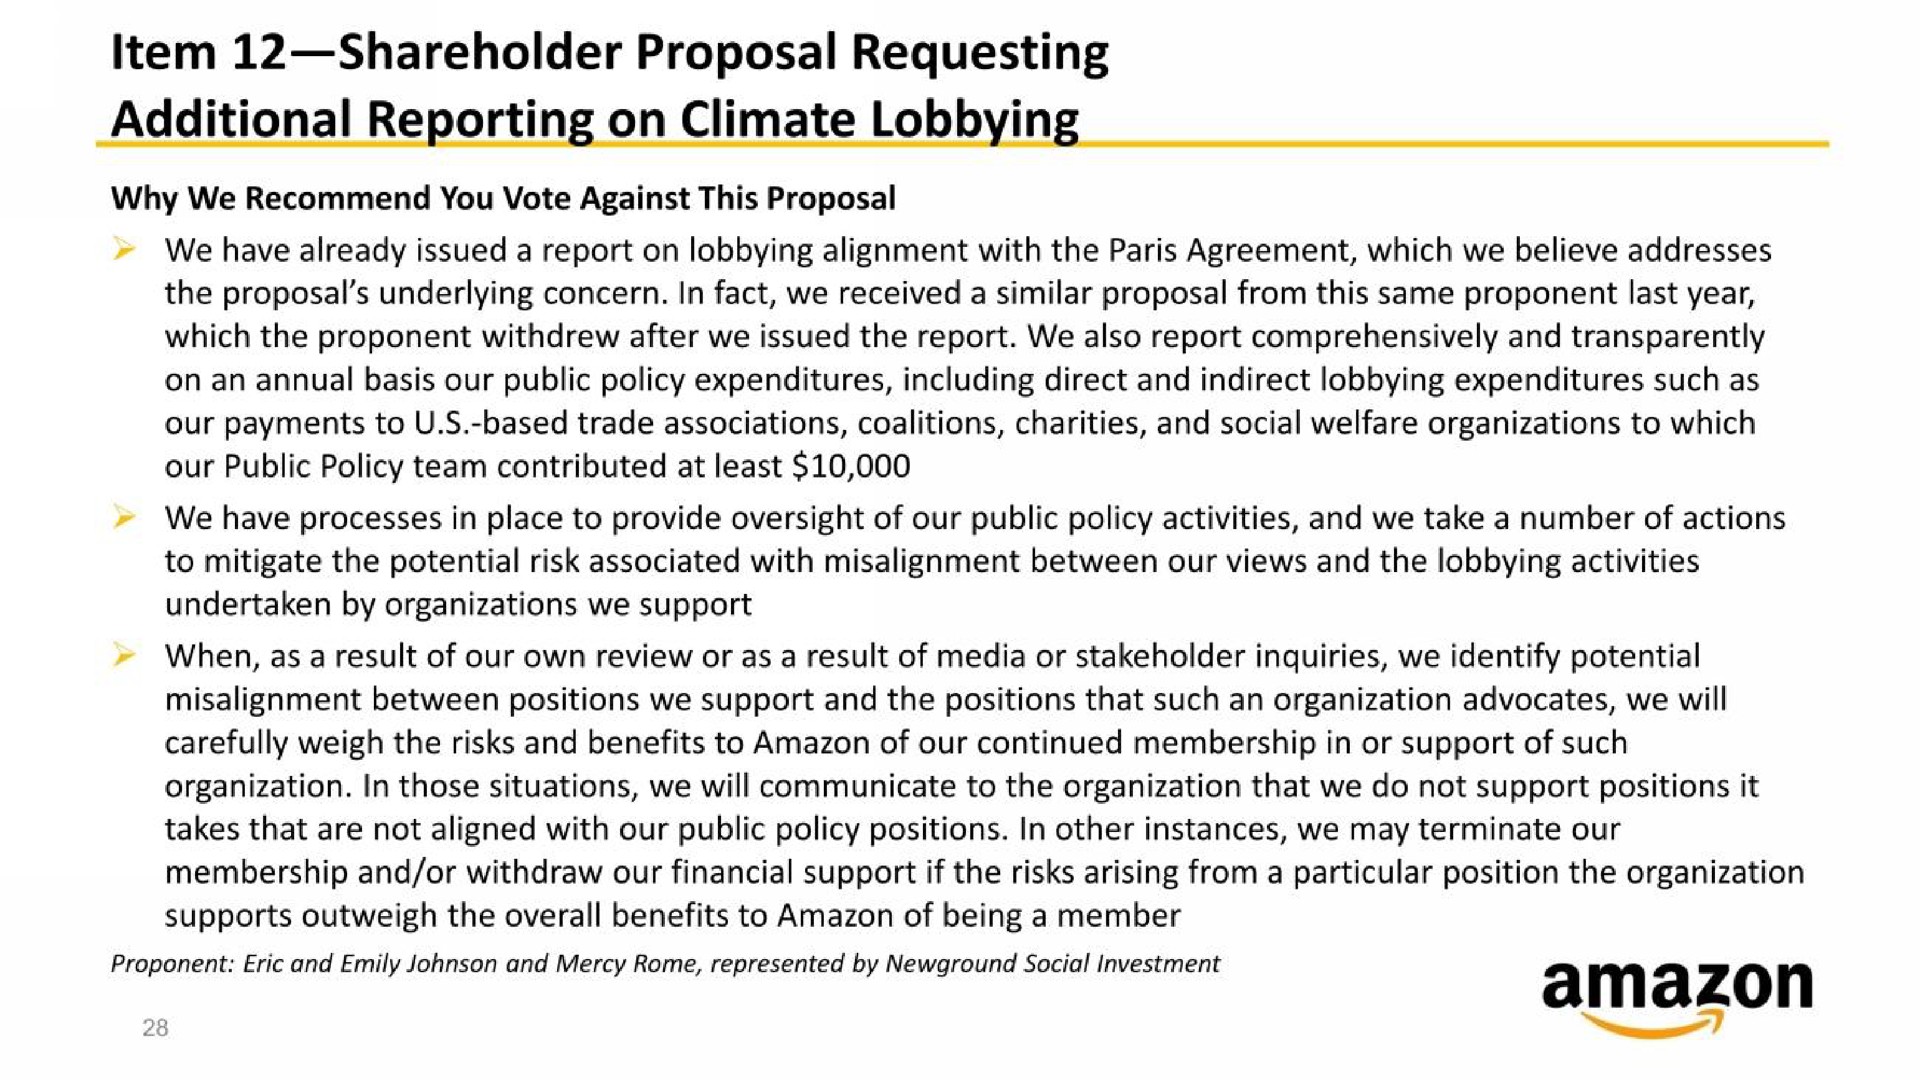 item shareholder proposal requesting additional reporting on climate lobbying | Amazon